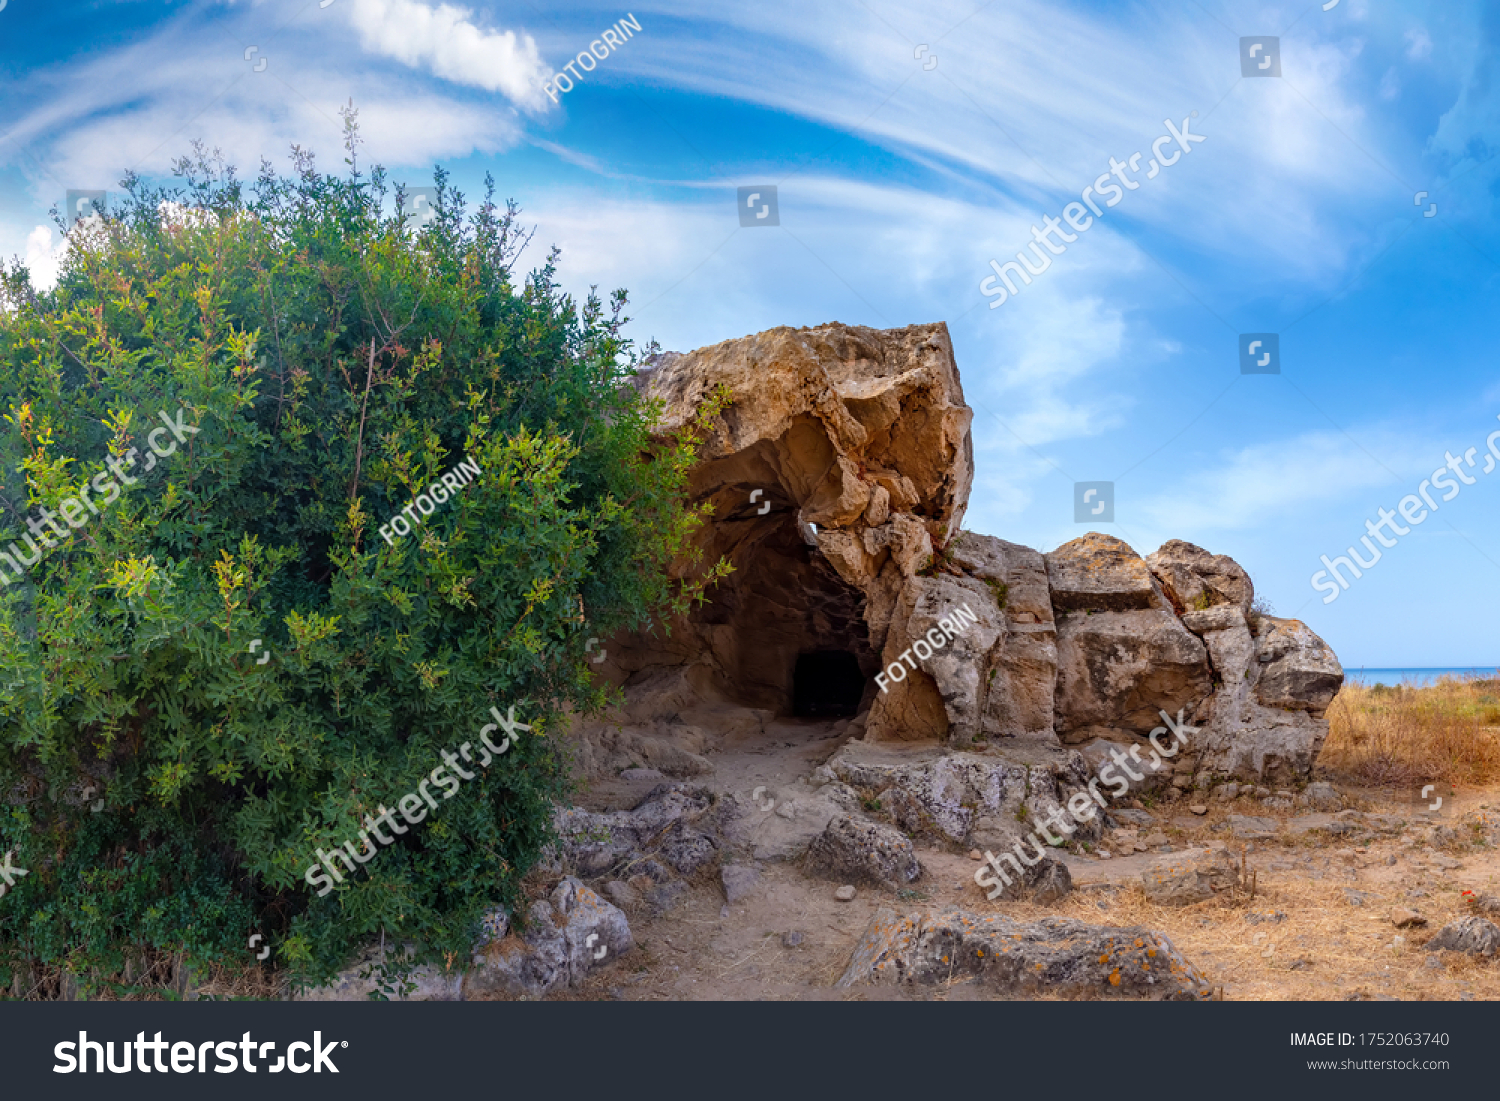 Pathos. Cyprus. Cave in the Archaeological Park of Paphos. Cyclops Cave. Tombs Of The Kings in Cyprus. Tree grows next to cave. Paphos nature landscape. Archaeological Park in open. #1752063740